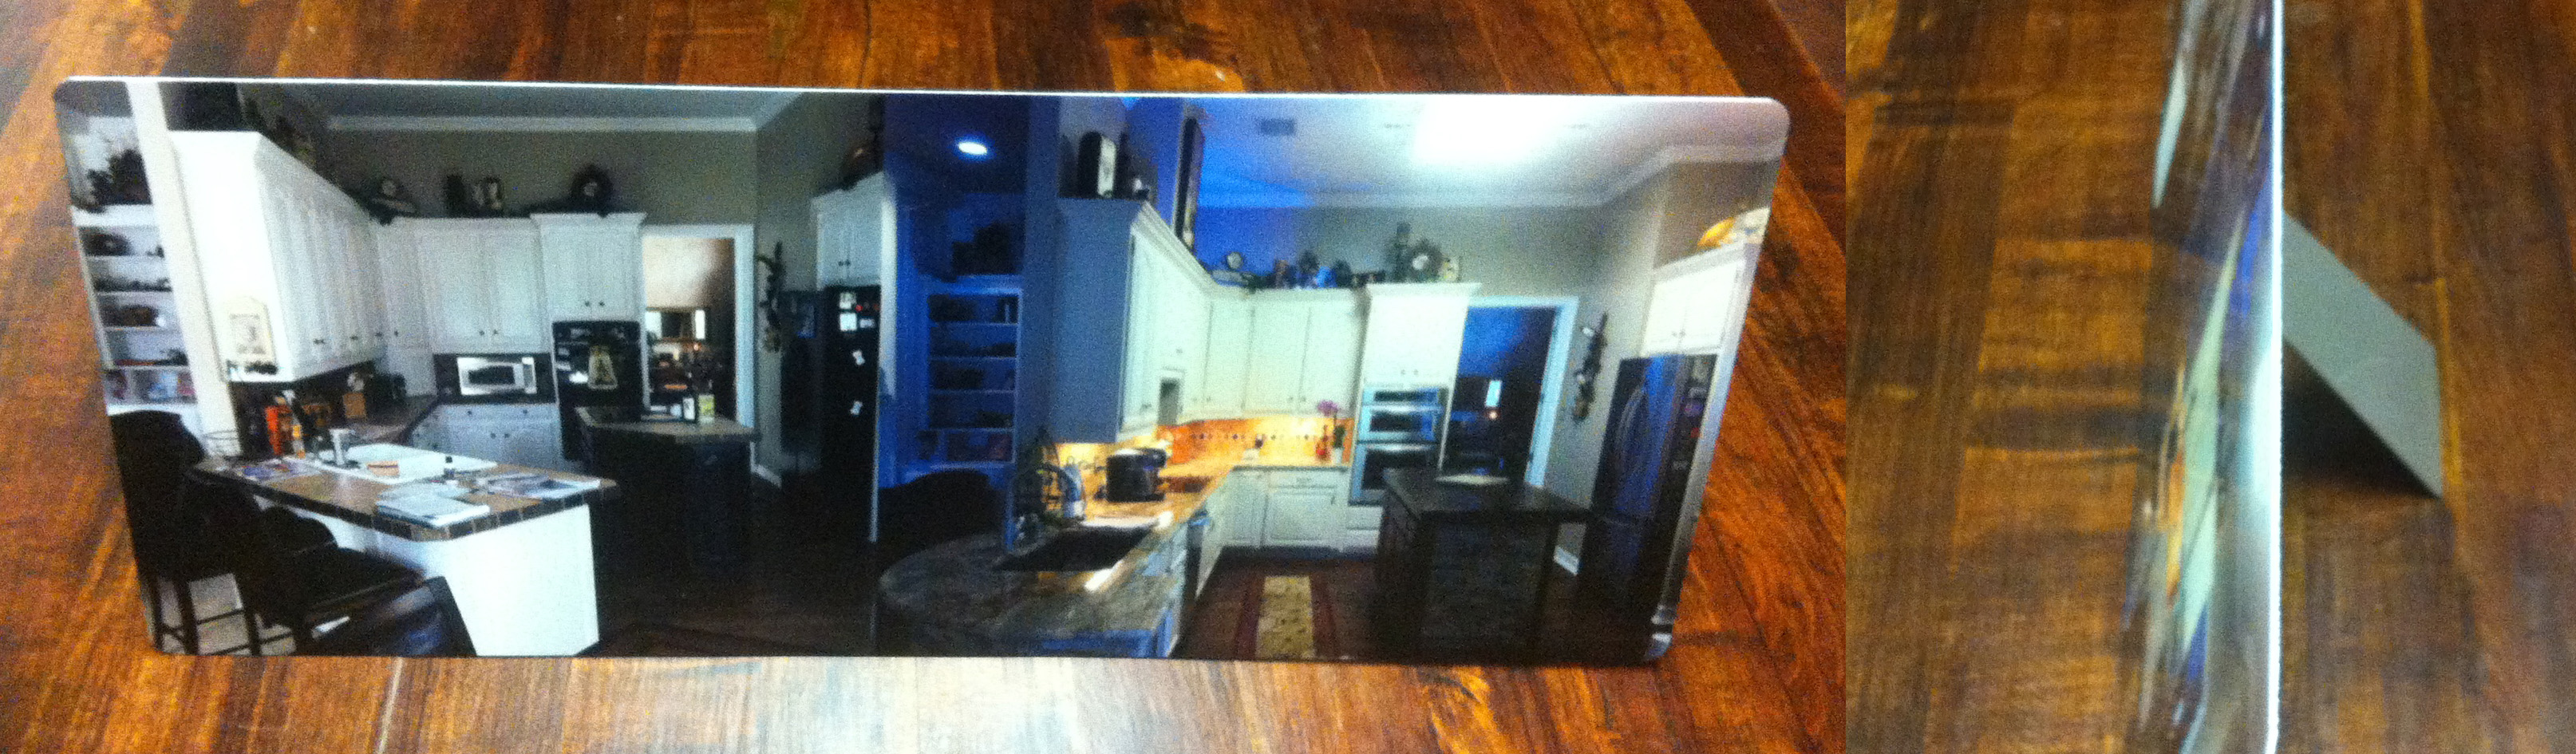 Before & After Kitchen Remodel made with sublimation printing